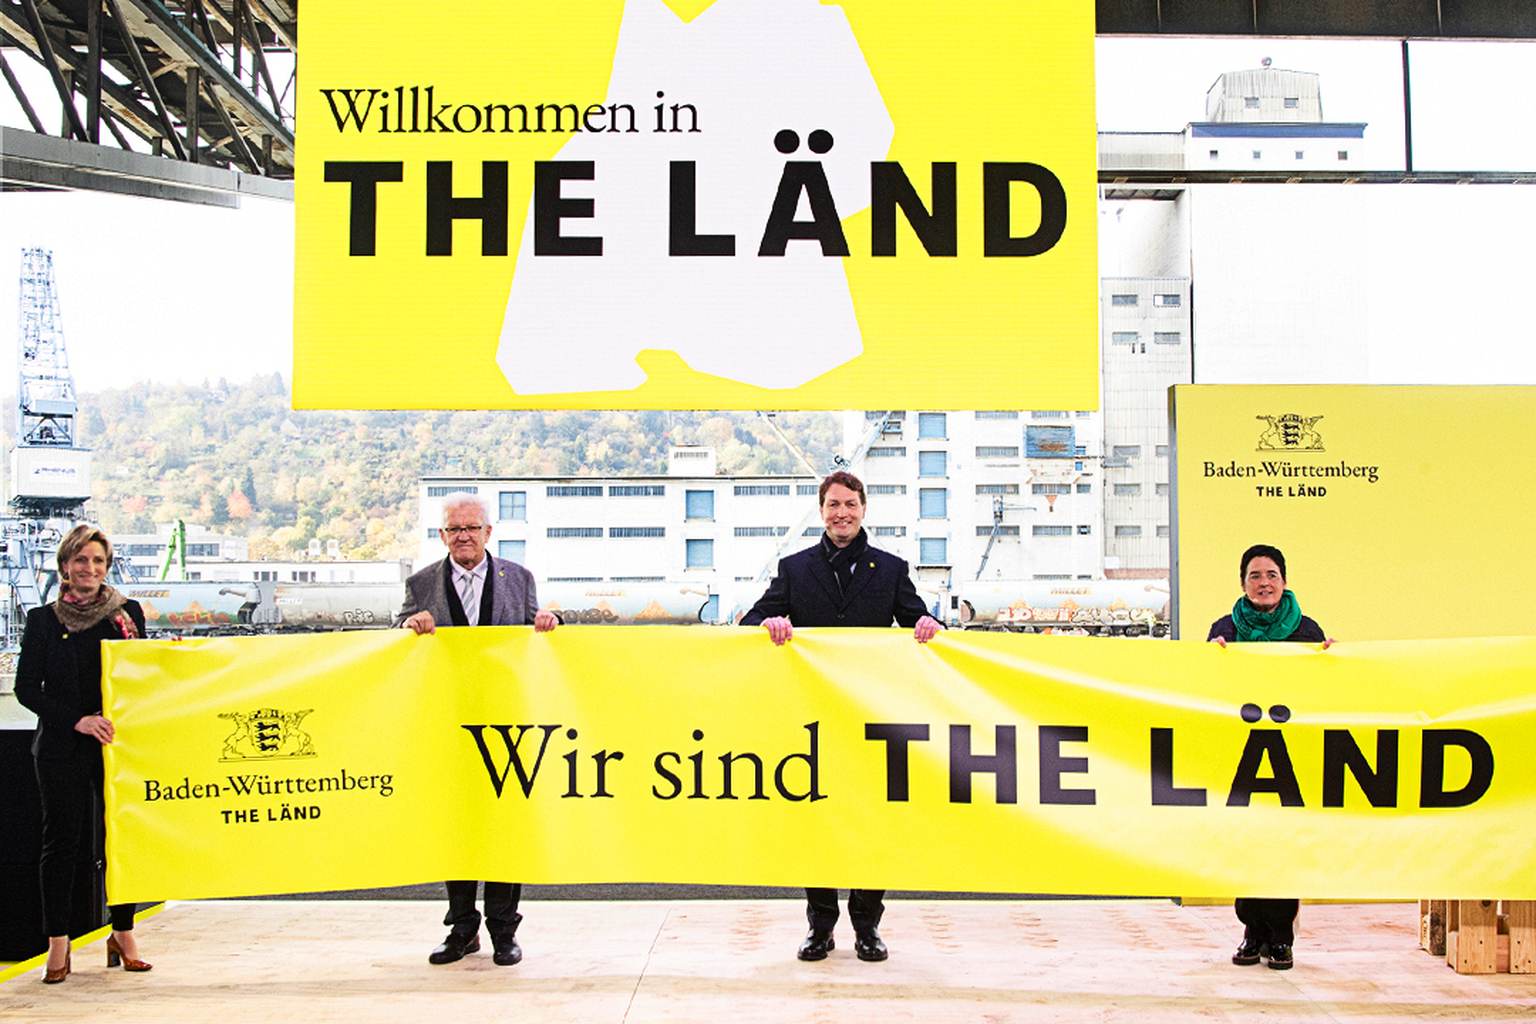 Prime Minister of Baden-Württemberg Winfried Kretschmann and other people are holding up a big "We are THE LÄND" banner.